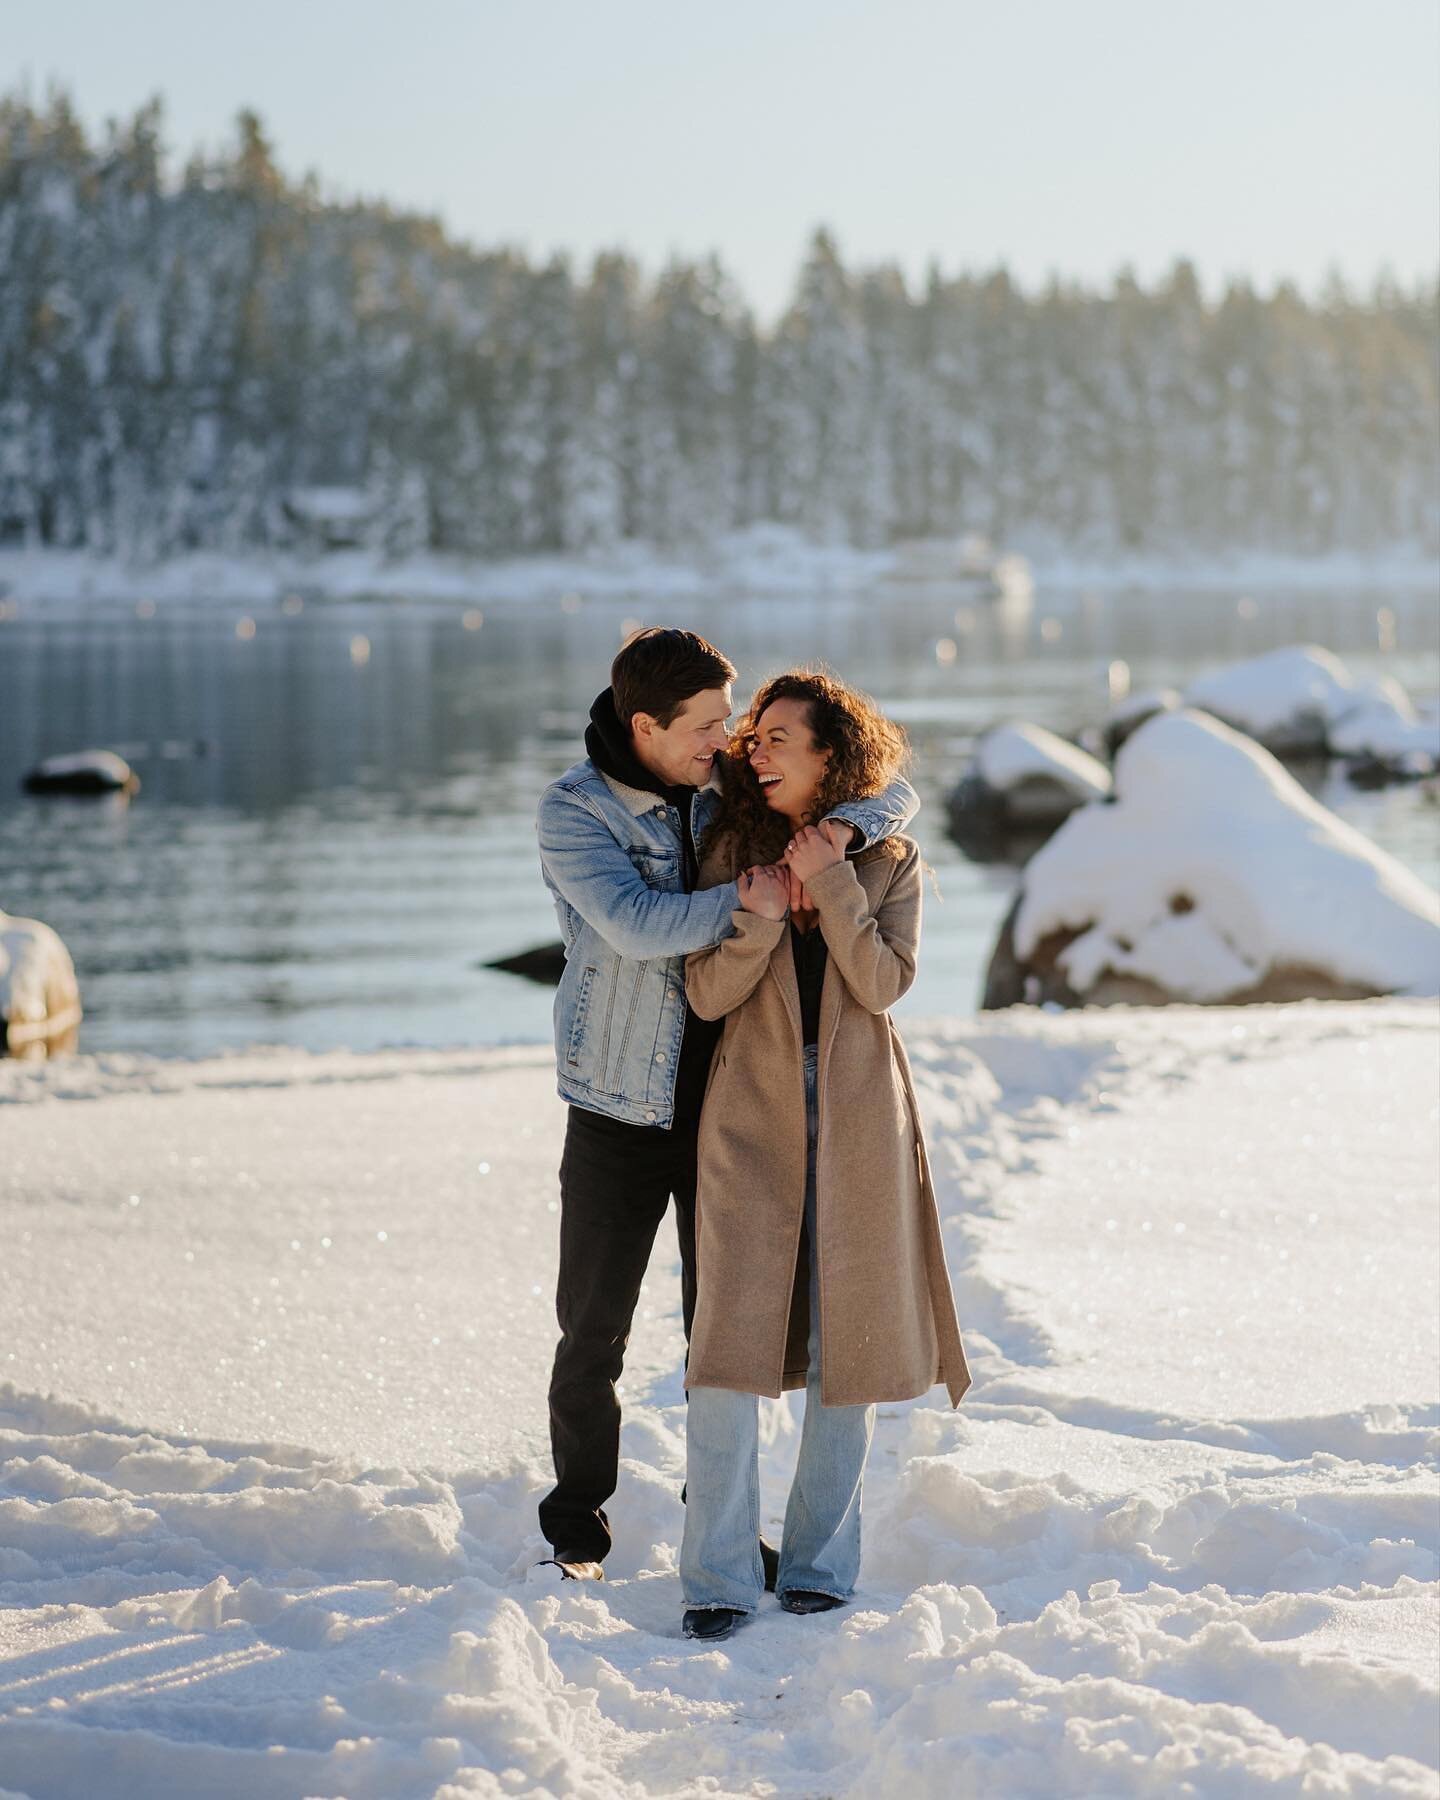 Snow has been on the forecast the last several days, with more on the way! Outside of fall, this is my favorite time of the year for photo sessions &mdash; this winter wonderland engagement session in Tahoe was exactly why! We pretty frozen by the en